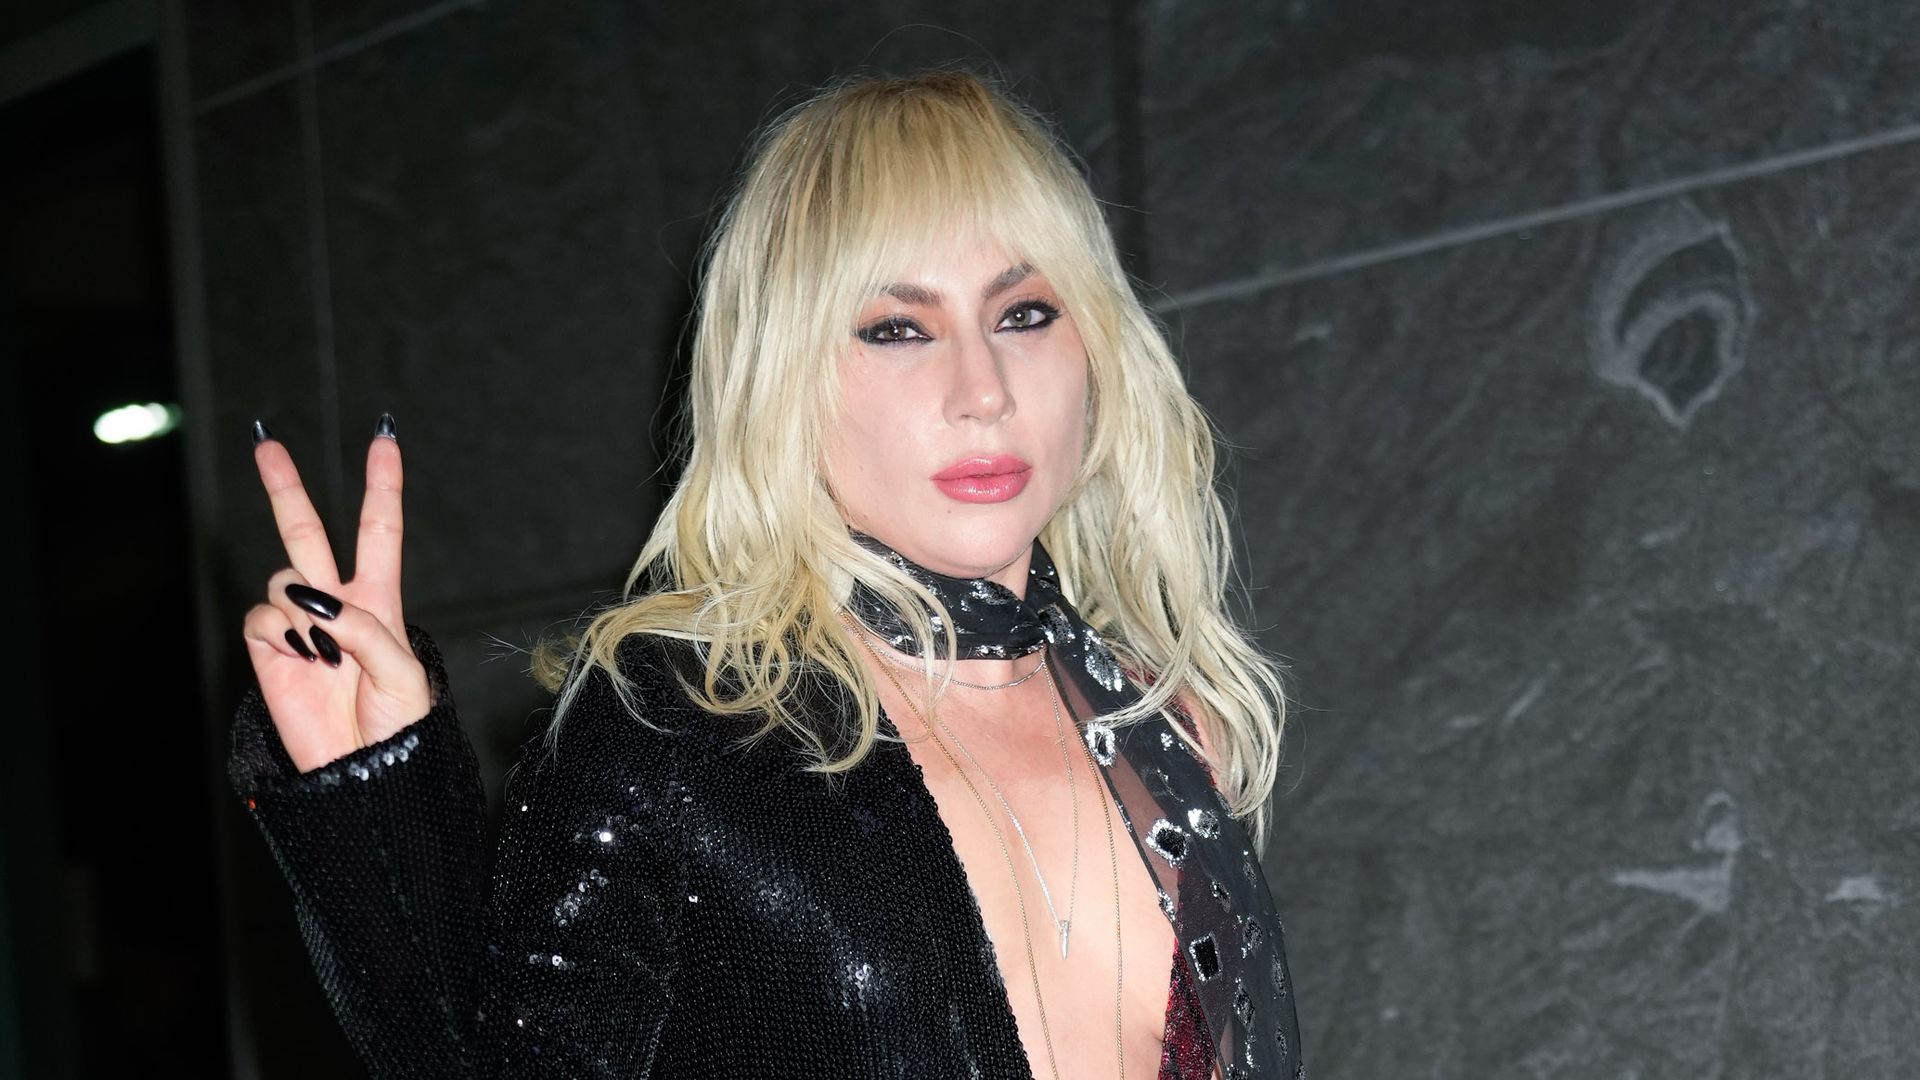 Lady Gaga showcases her incredible physique